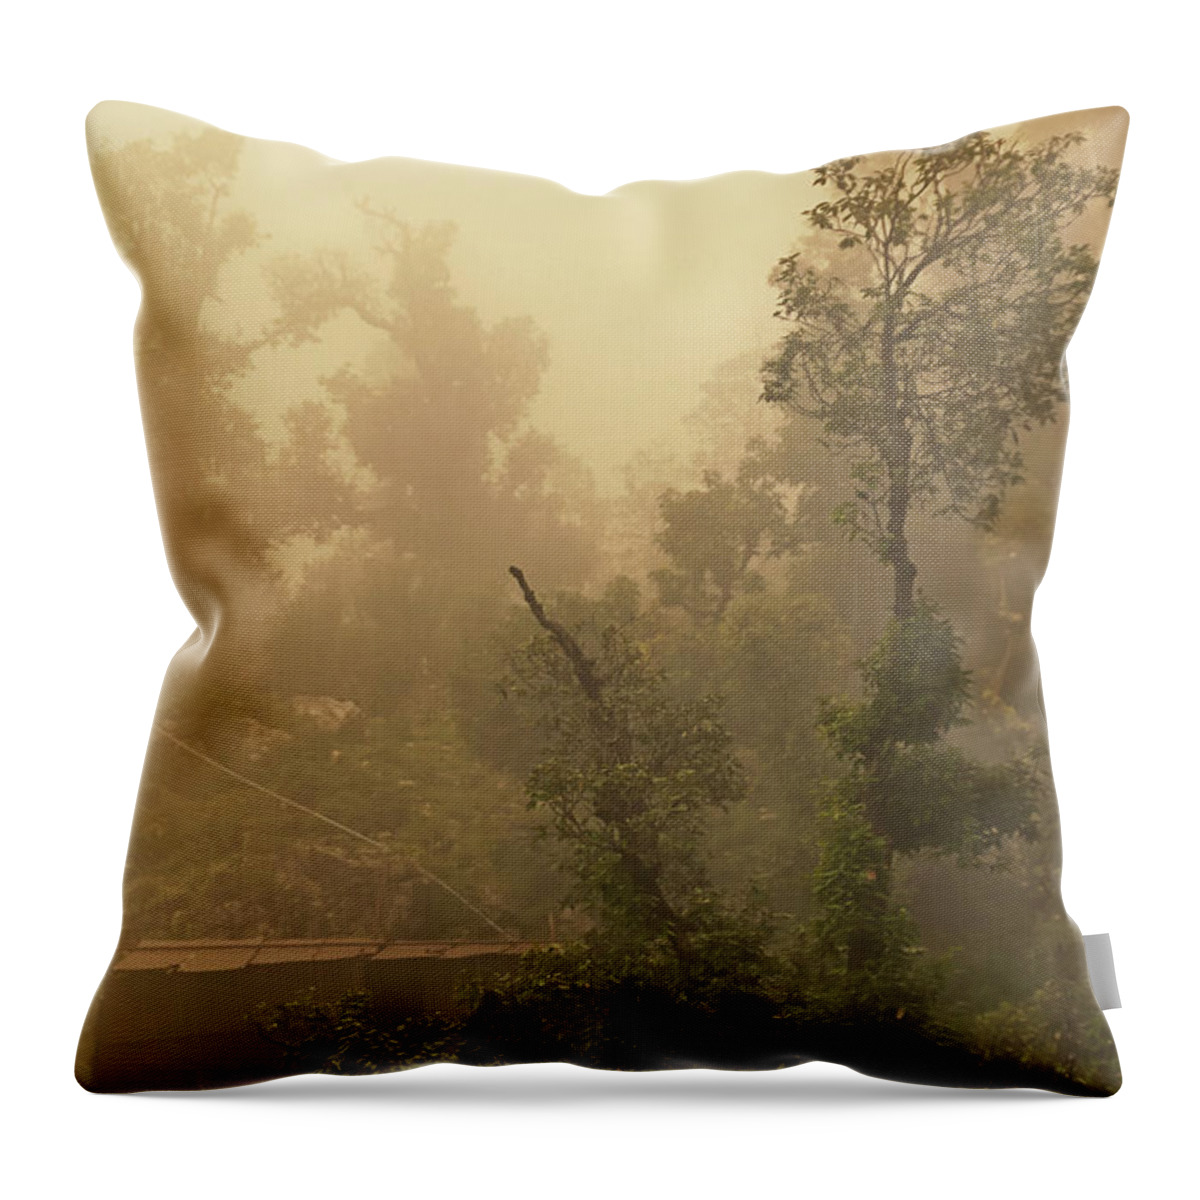 India Throw Pillow featuring the photograph Abandoned Shed by Rajiv Chopra